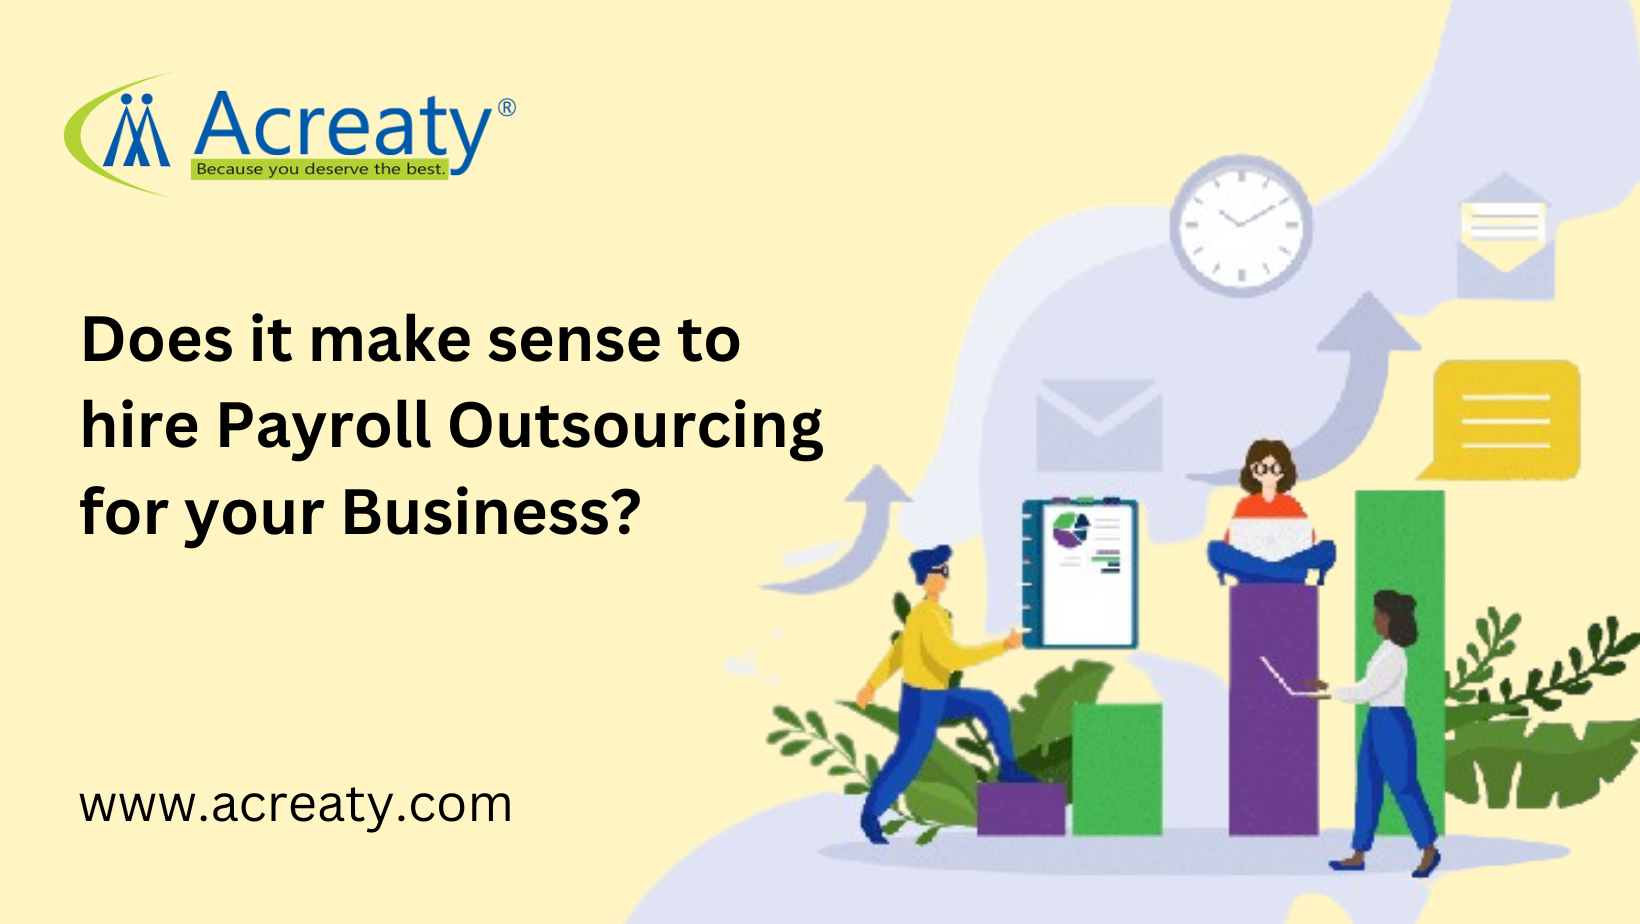 Does it make sense to hire Payroll Outsourcing for your Business?